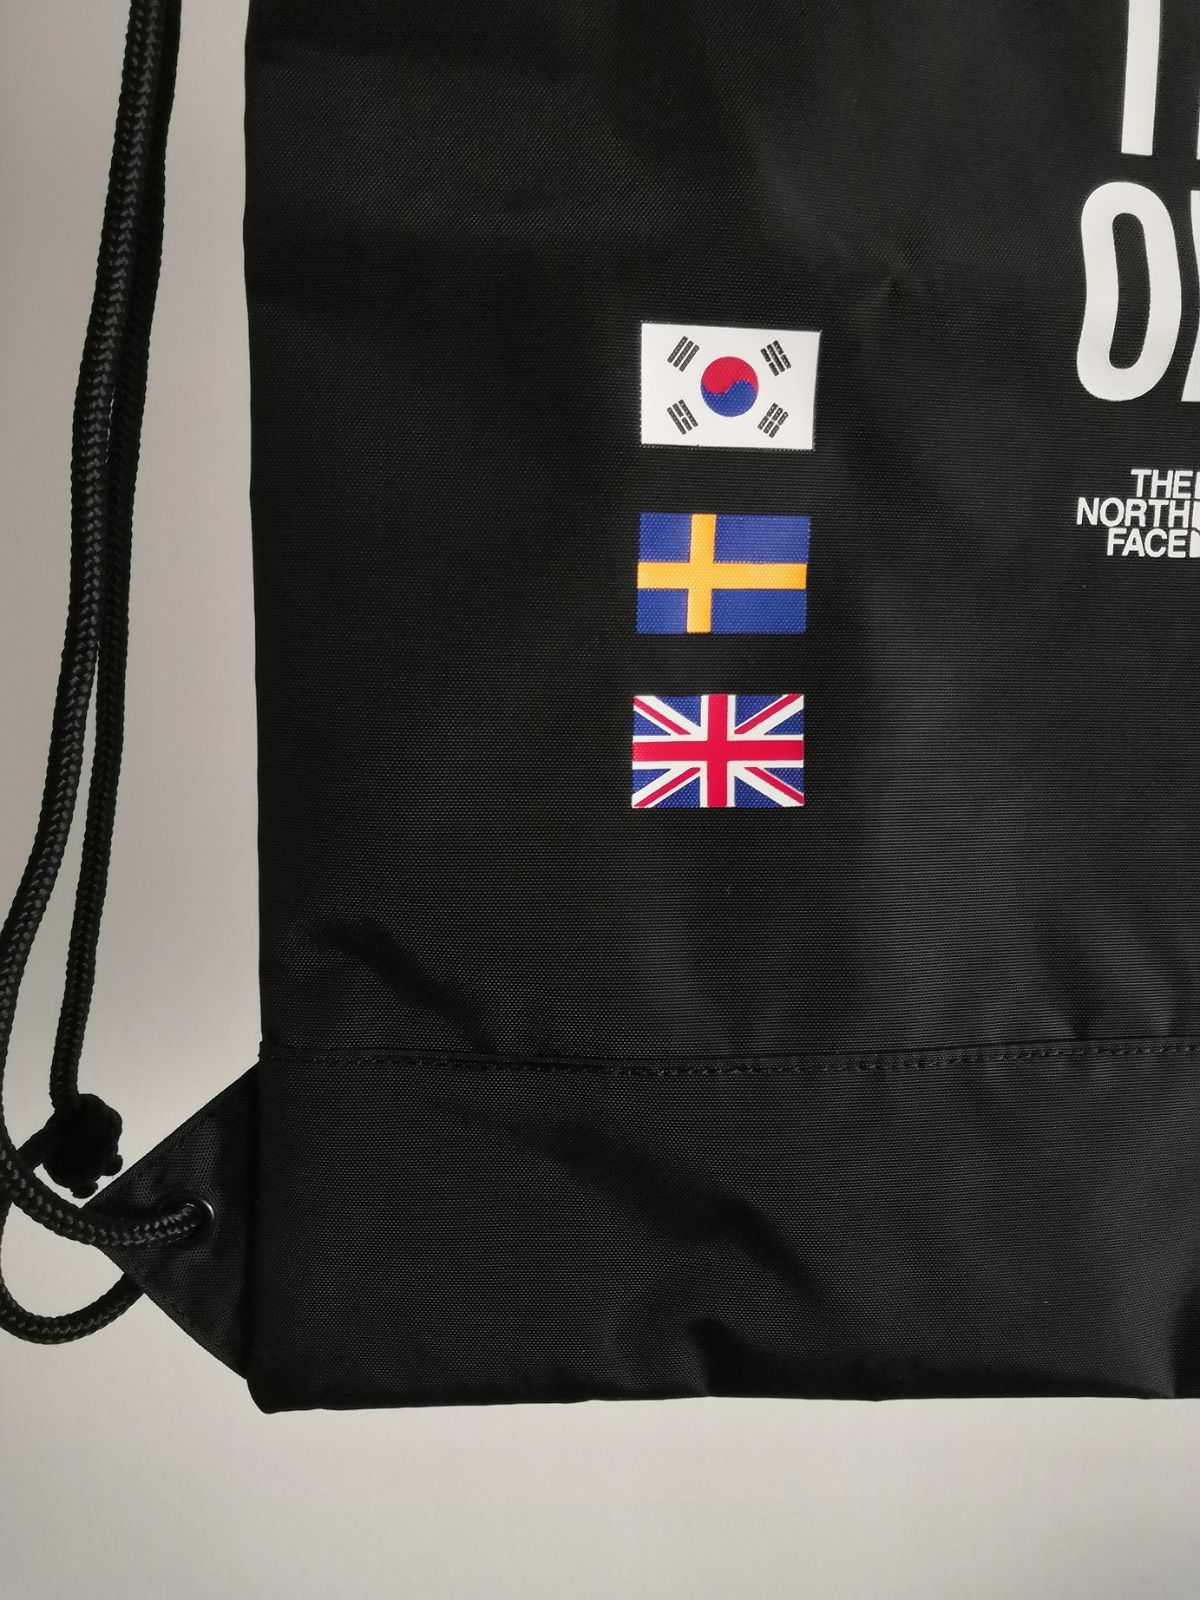 THE NORTH FACE 韓国限定　バックパック　ジムサック　ジムバッグ